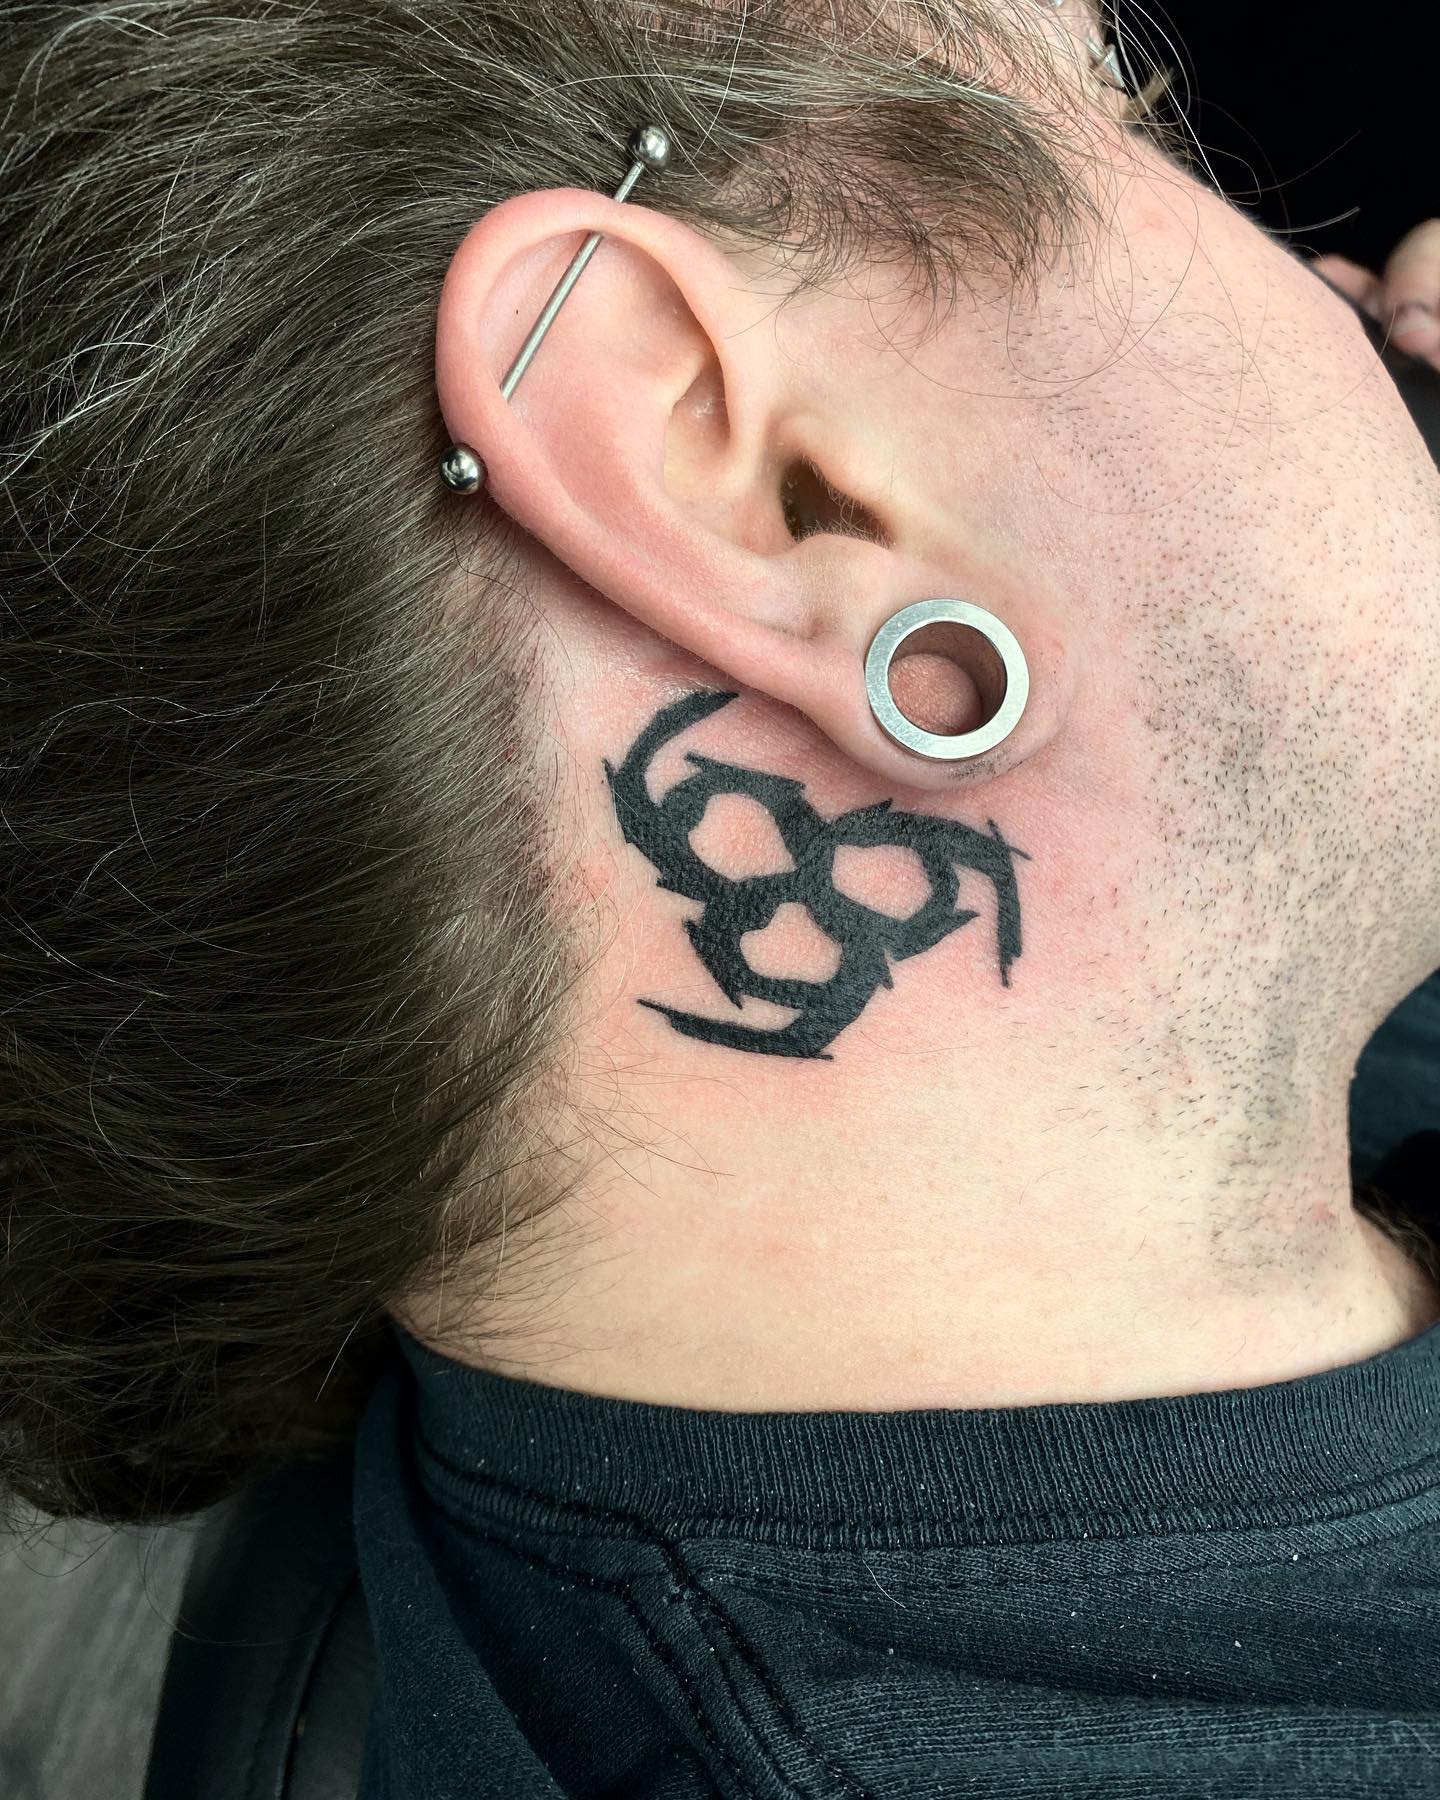 Behindtheear tattoos for men designs and ideas  Tattooing